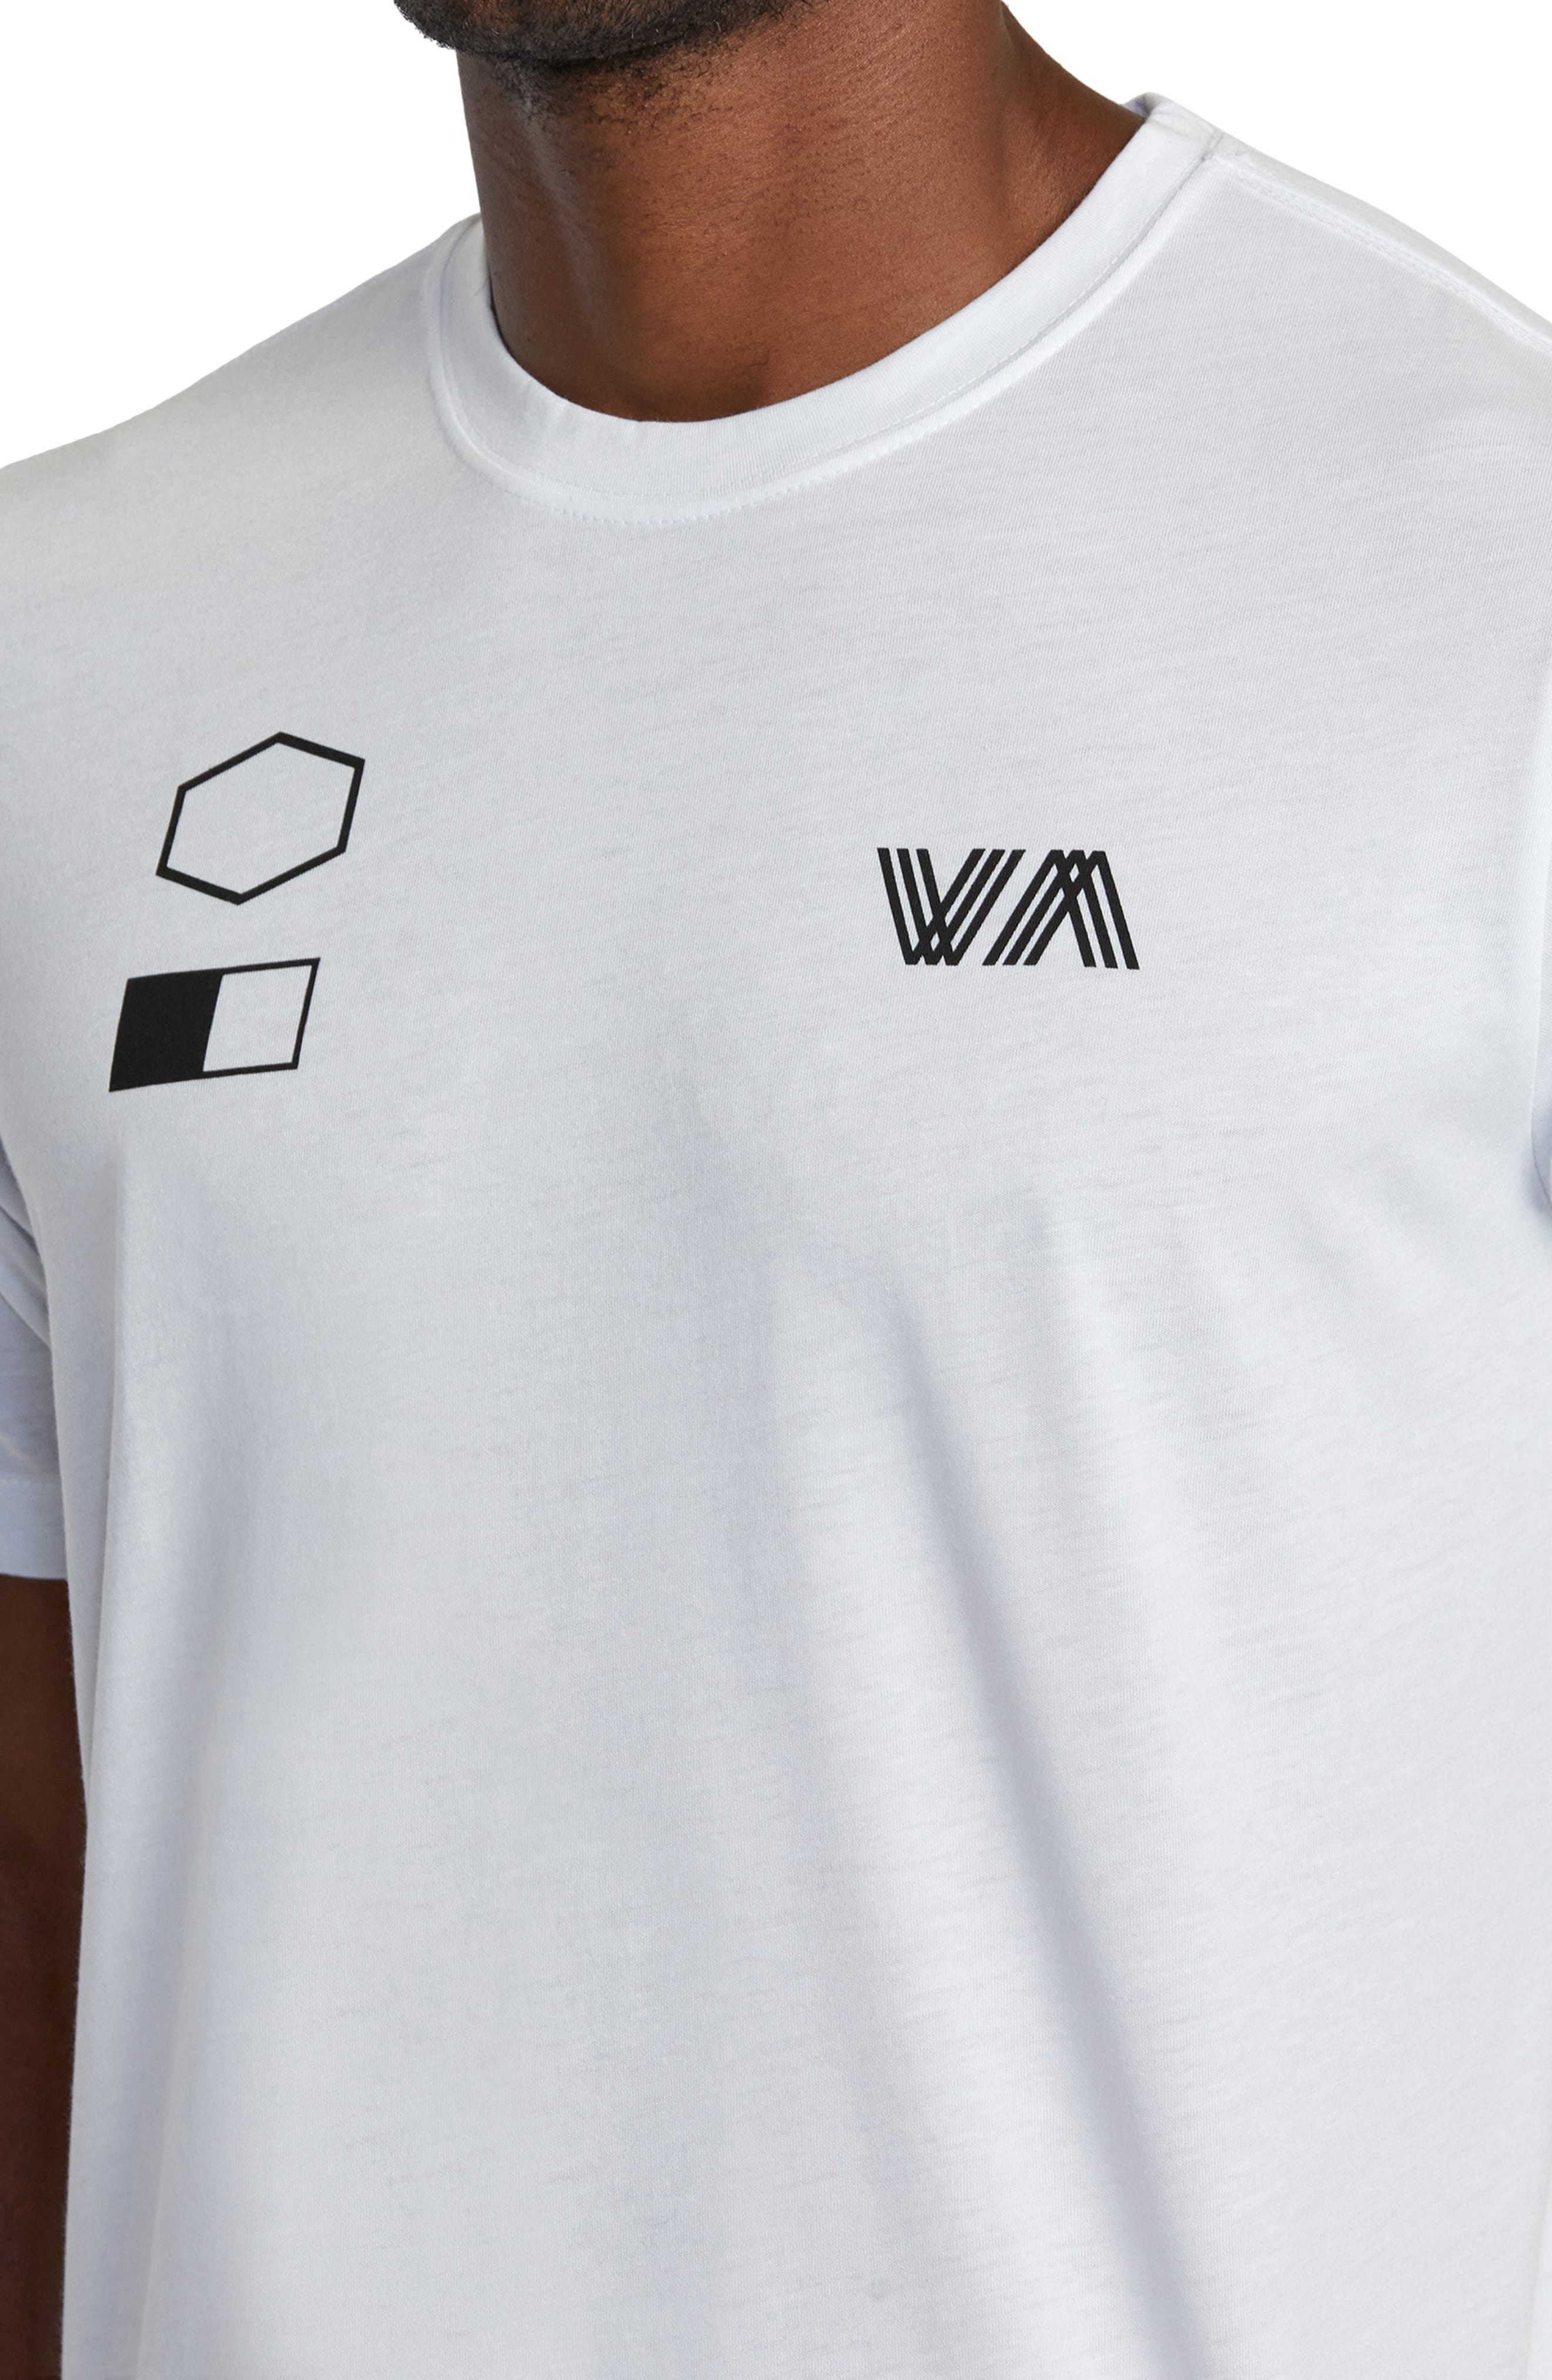 RVCA Copy Performance Graphic T-Shirt in White